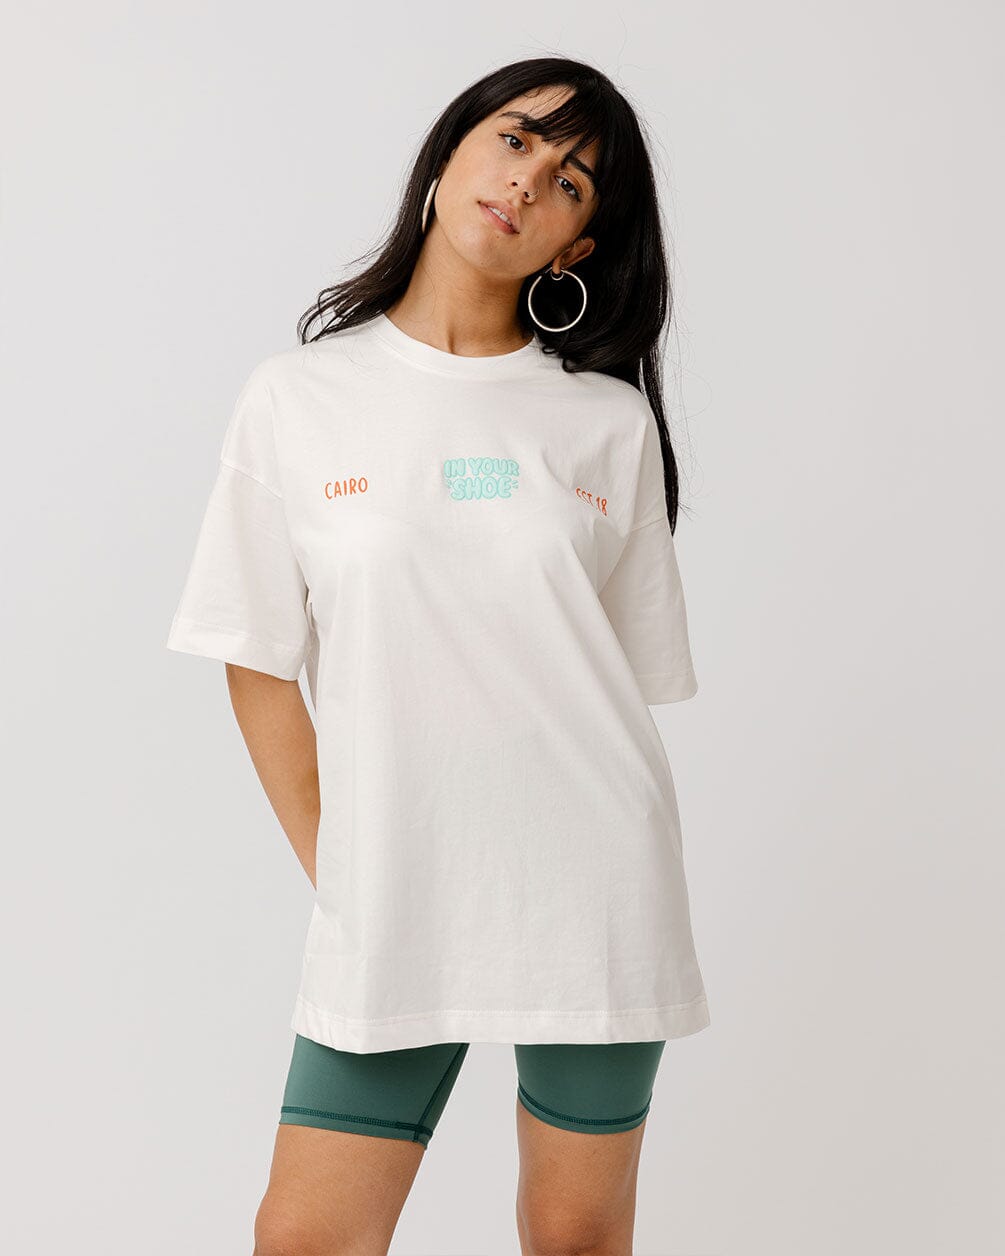 Stay Highdrated Printed Oversized Tee Printed Oversized Tees In Your Shoe S 